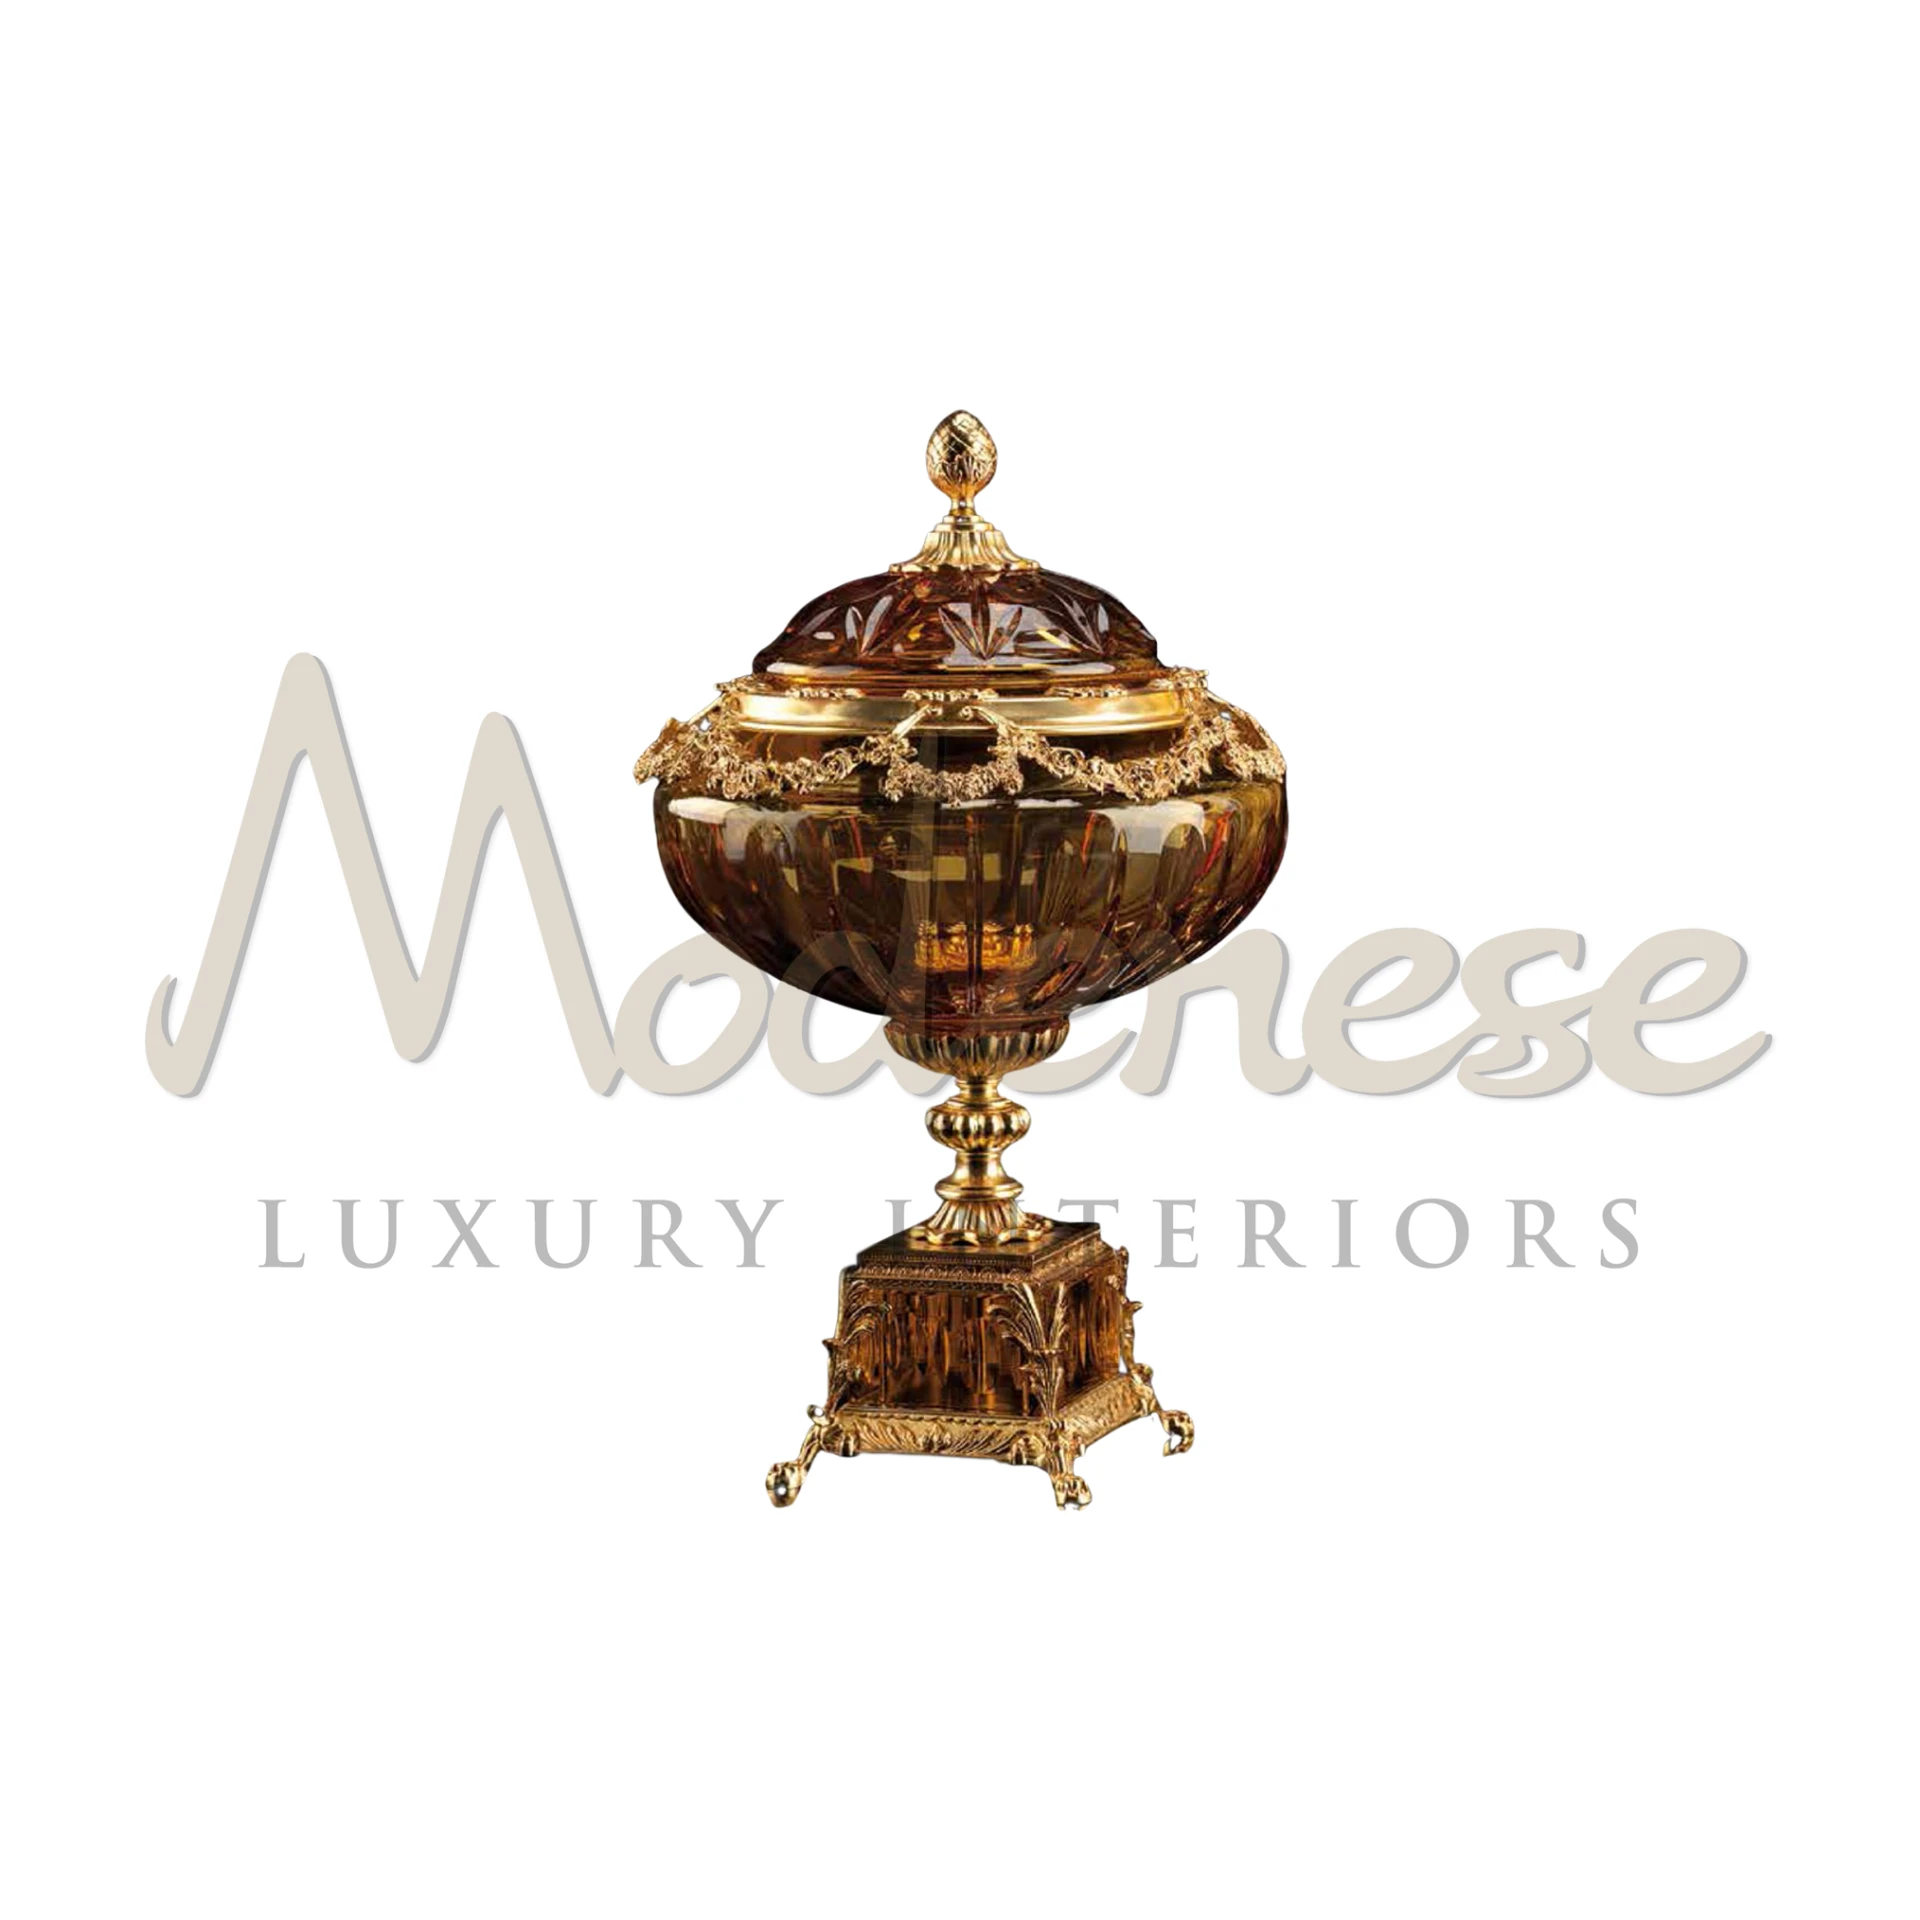 Imperial Luxury Vase in Italian style, perfect as a statement piece with its ornate details and luxurious materials.